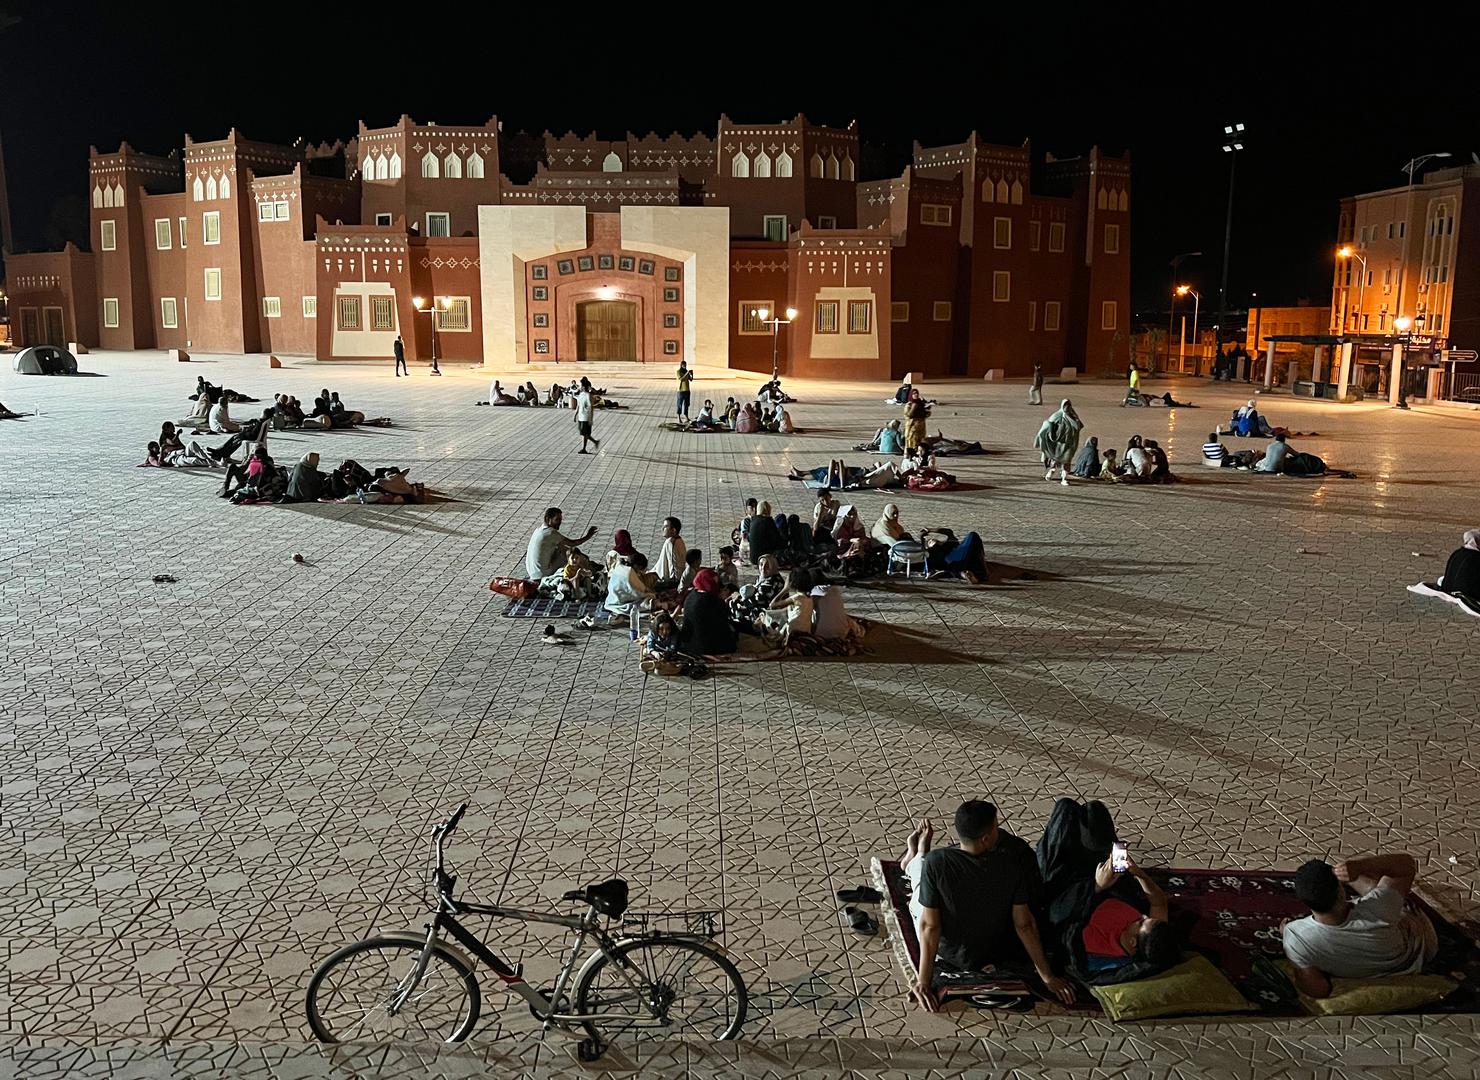 (230909) -- OUARZAZAT, Sept. 9, 2023 (Xinhua) -- This photo taken with a mobile phone shows residents taking shelter at an open space after an earthquake in Ouarzazate, Morocco, Sept. 9, 2023. At least 30 people have been killed in a strong earthquake that jolted Morocco on Friday night, local media reported, adding that the death toll is expected to increase. (Xinhua/Wang Dongzhen) Photo: Wang Dongzhen/XINHUA